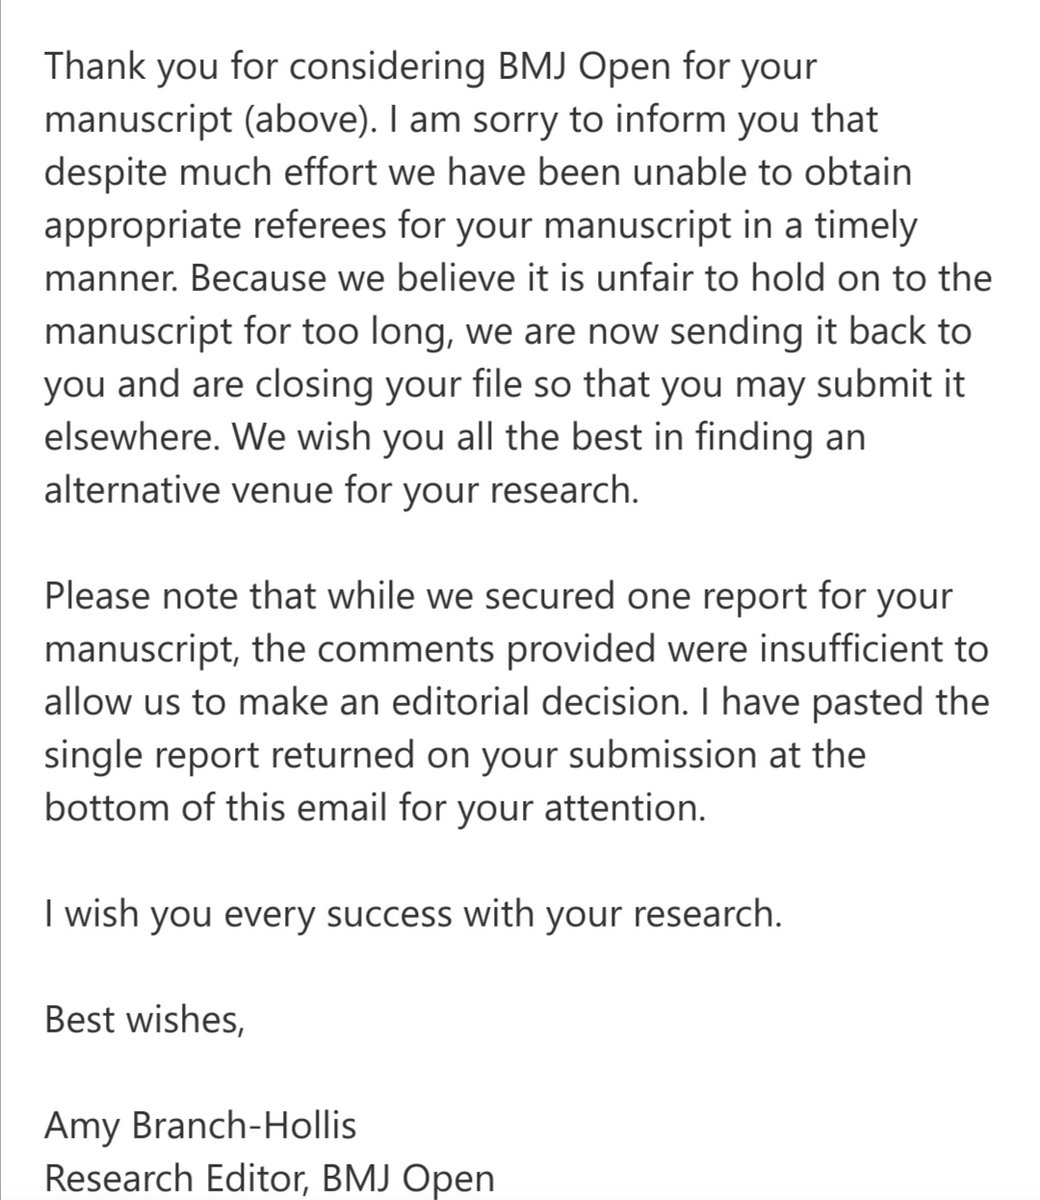 This is a first! @BMJ_Open could not find peer reviewers, so our manuscript was withdrawn! #rejection #OpenScience #PeerReview #JournalPublishing